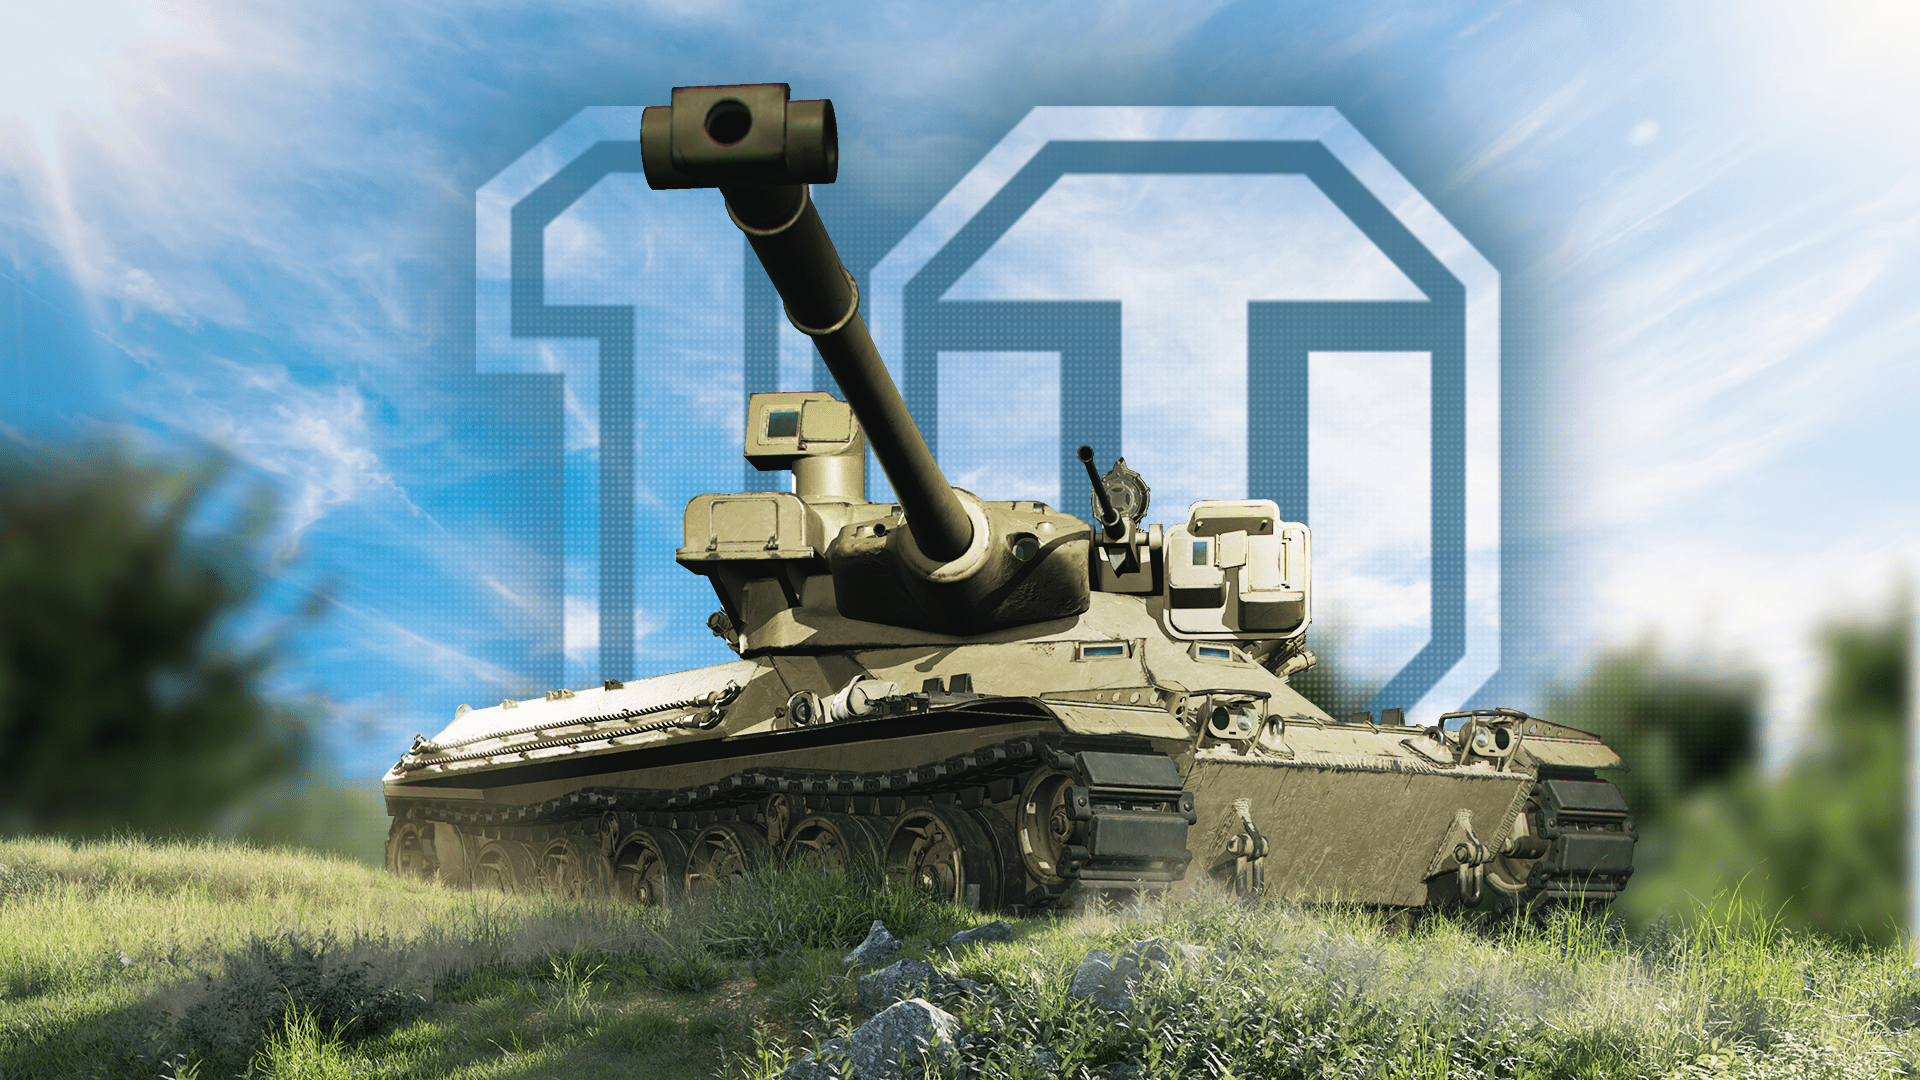 MBT-B 10th Anniversary Rendered Image